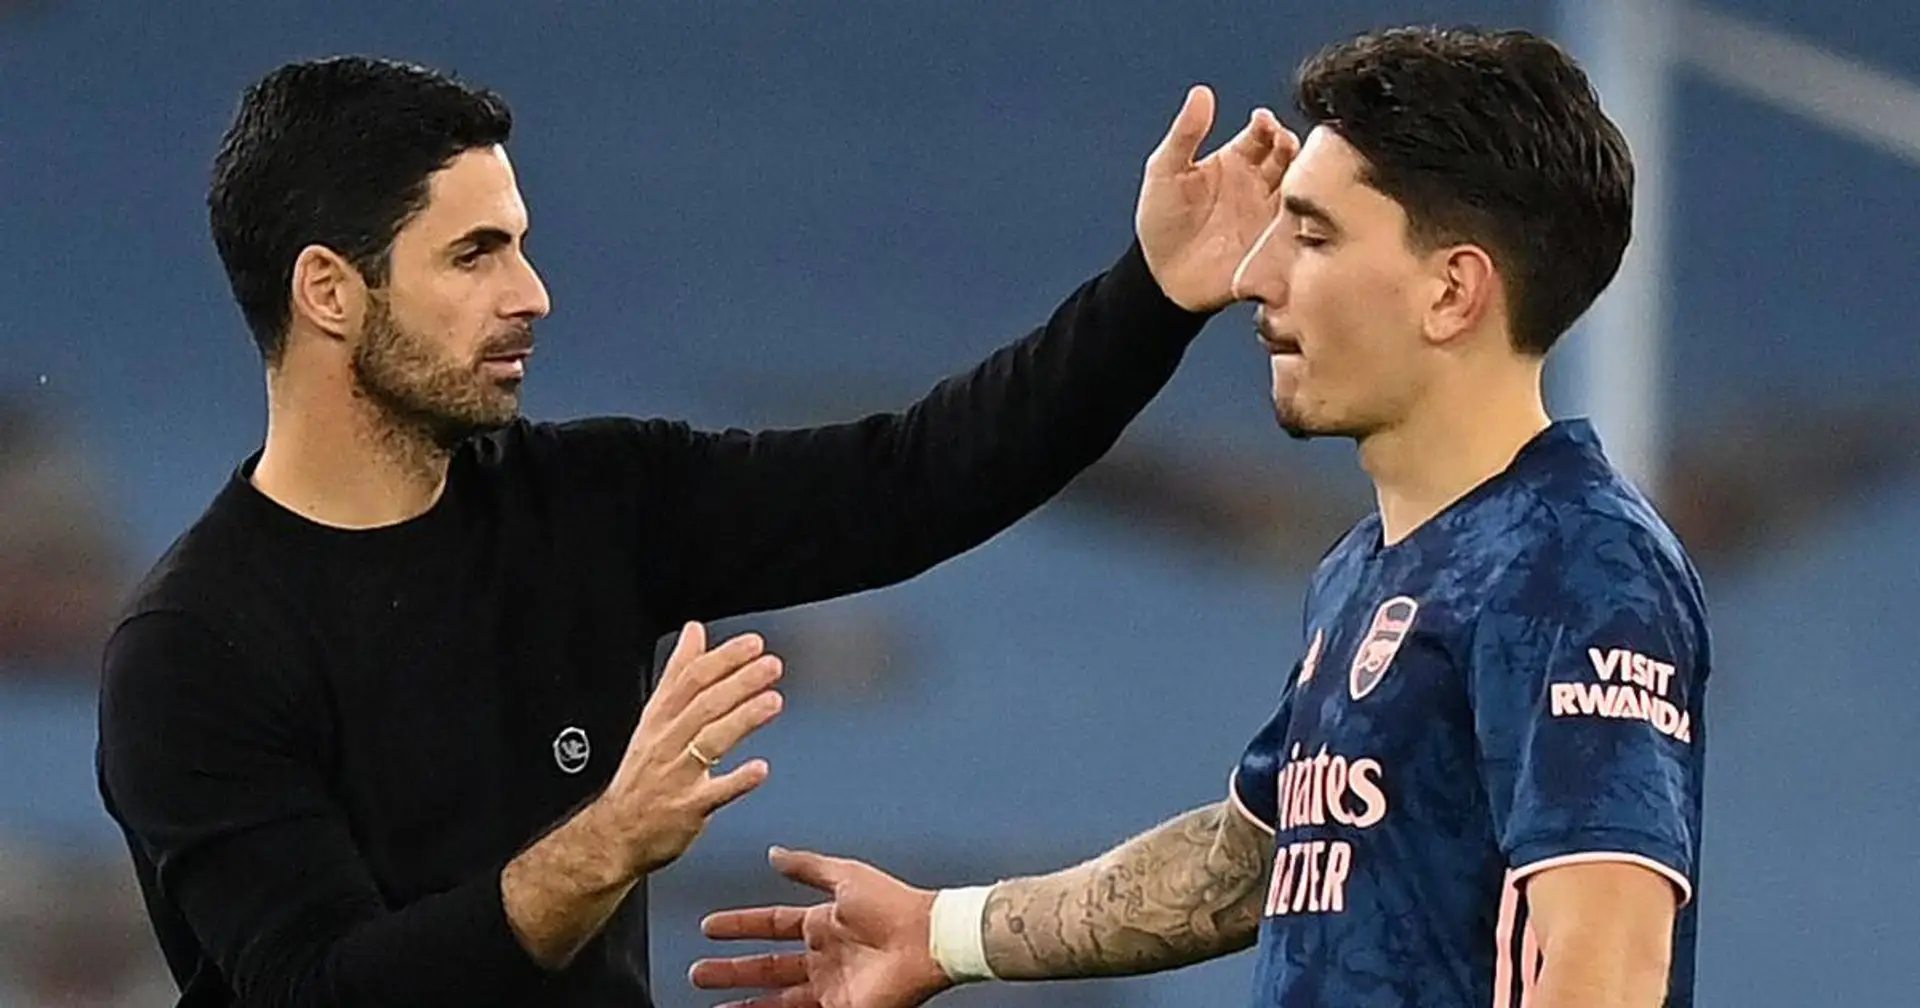 Bellerin might leave this summer as part of agreement with Arteta (reliability: 4 stars)